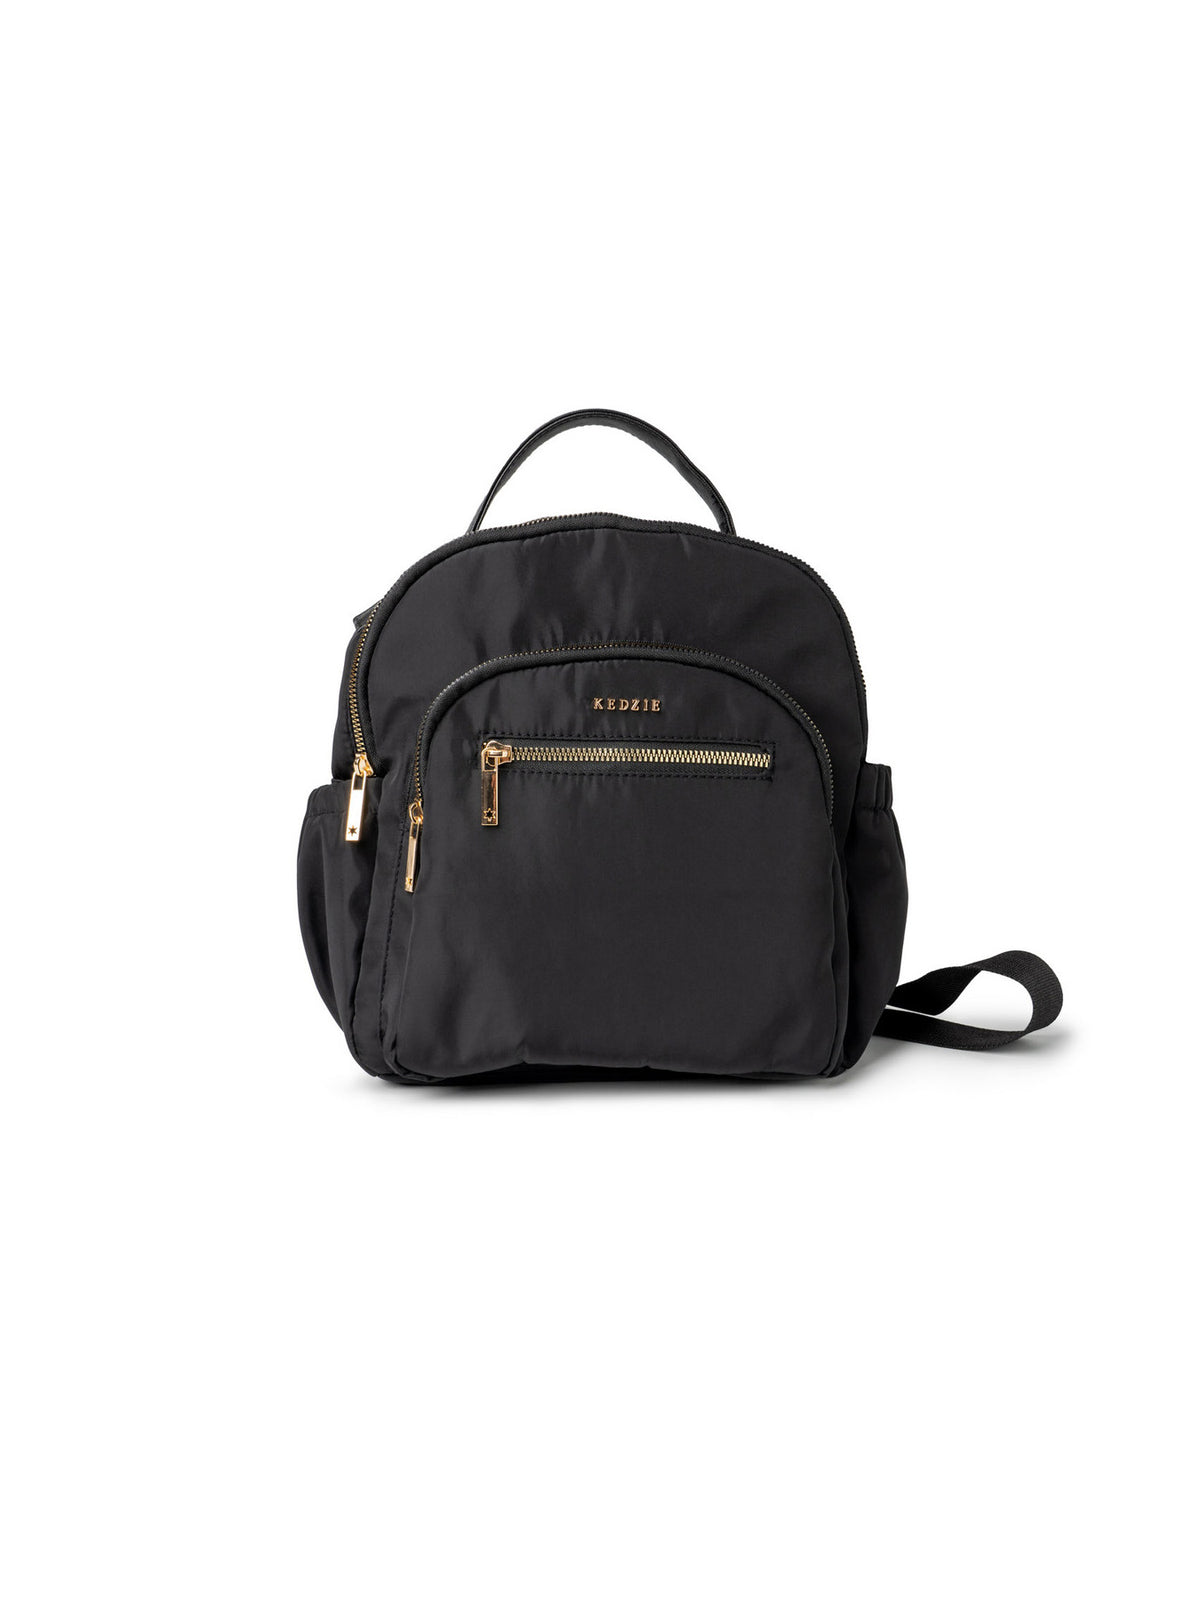 kedzie aire convertible backpack in black